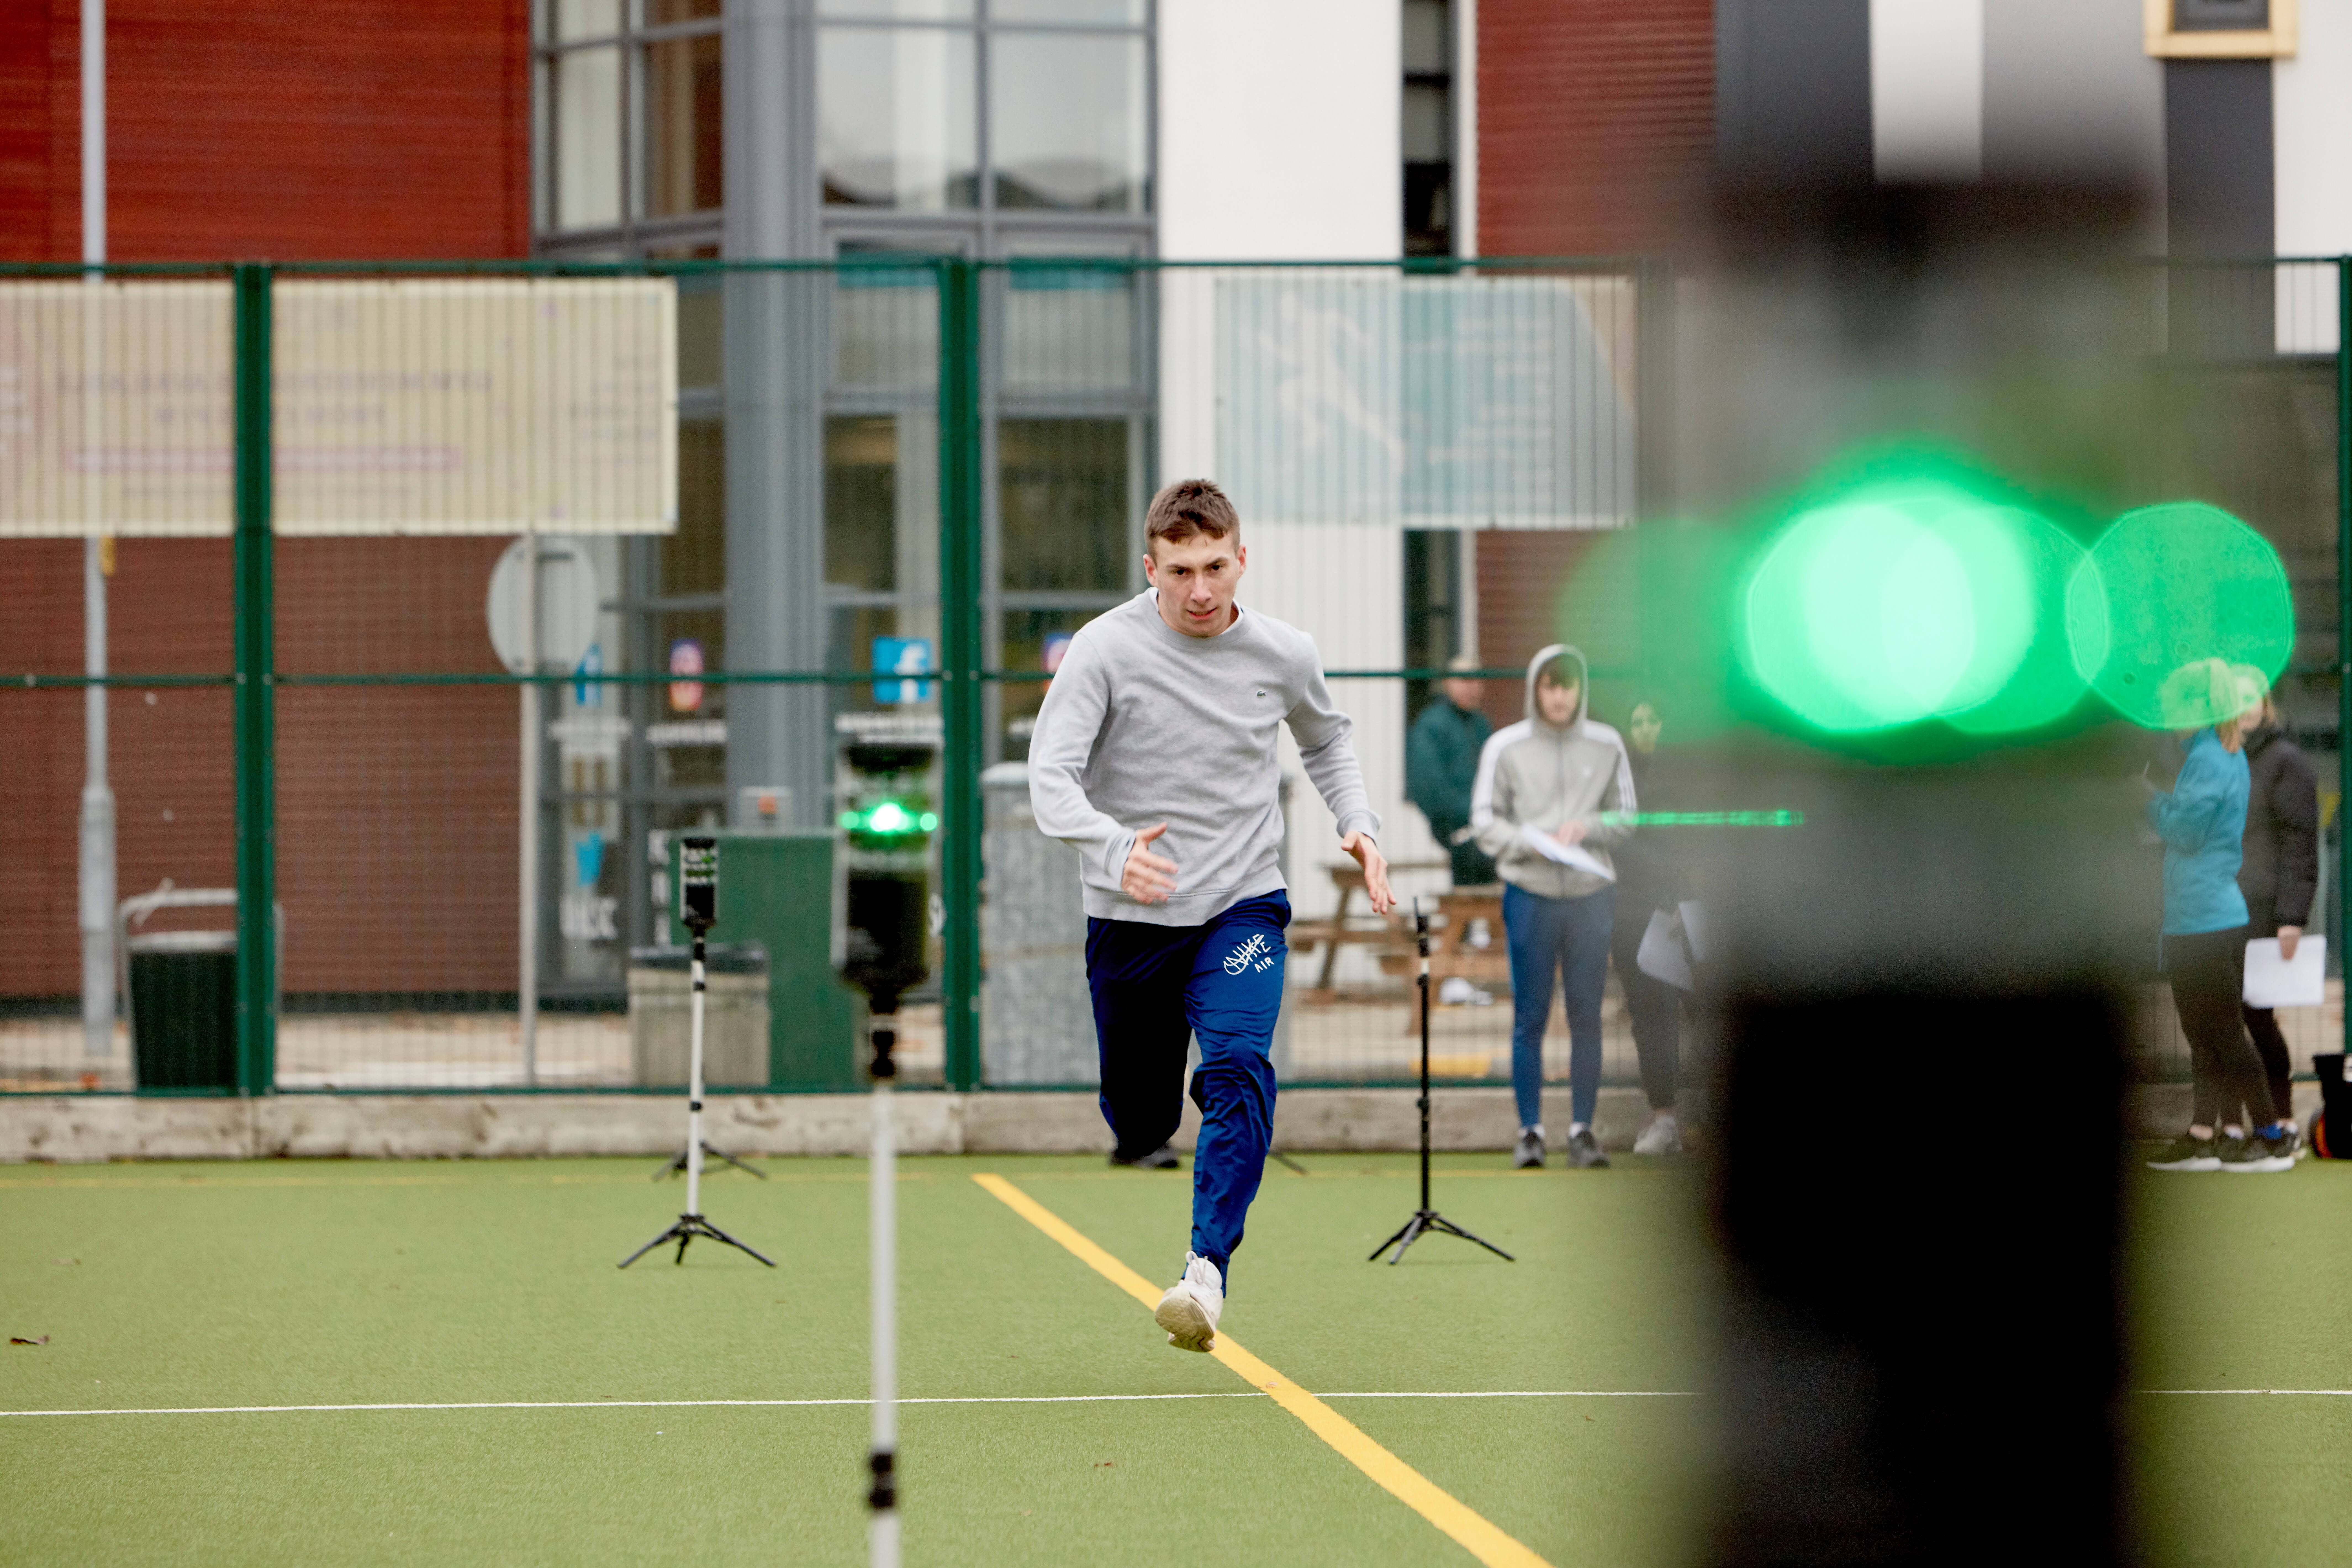 Don’t put a stop on your future. Discover Sport and Exercise Science at the University of Lincoln